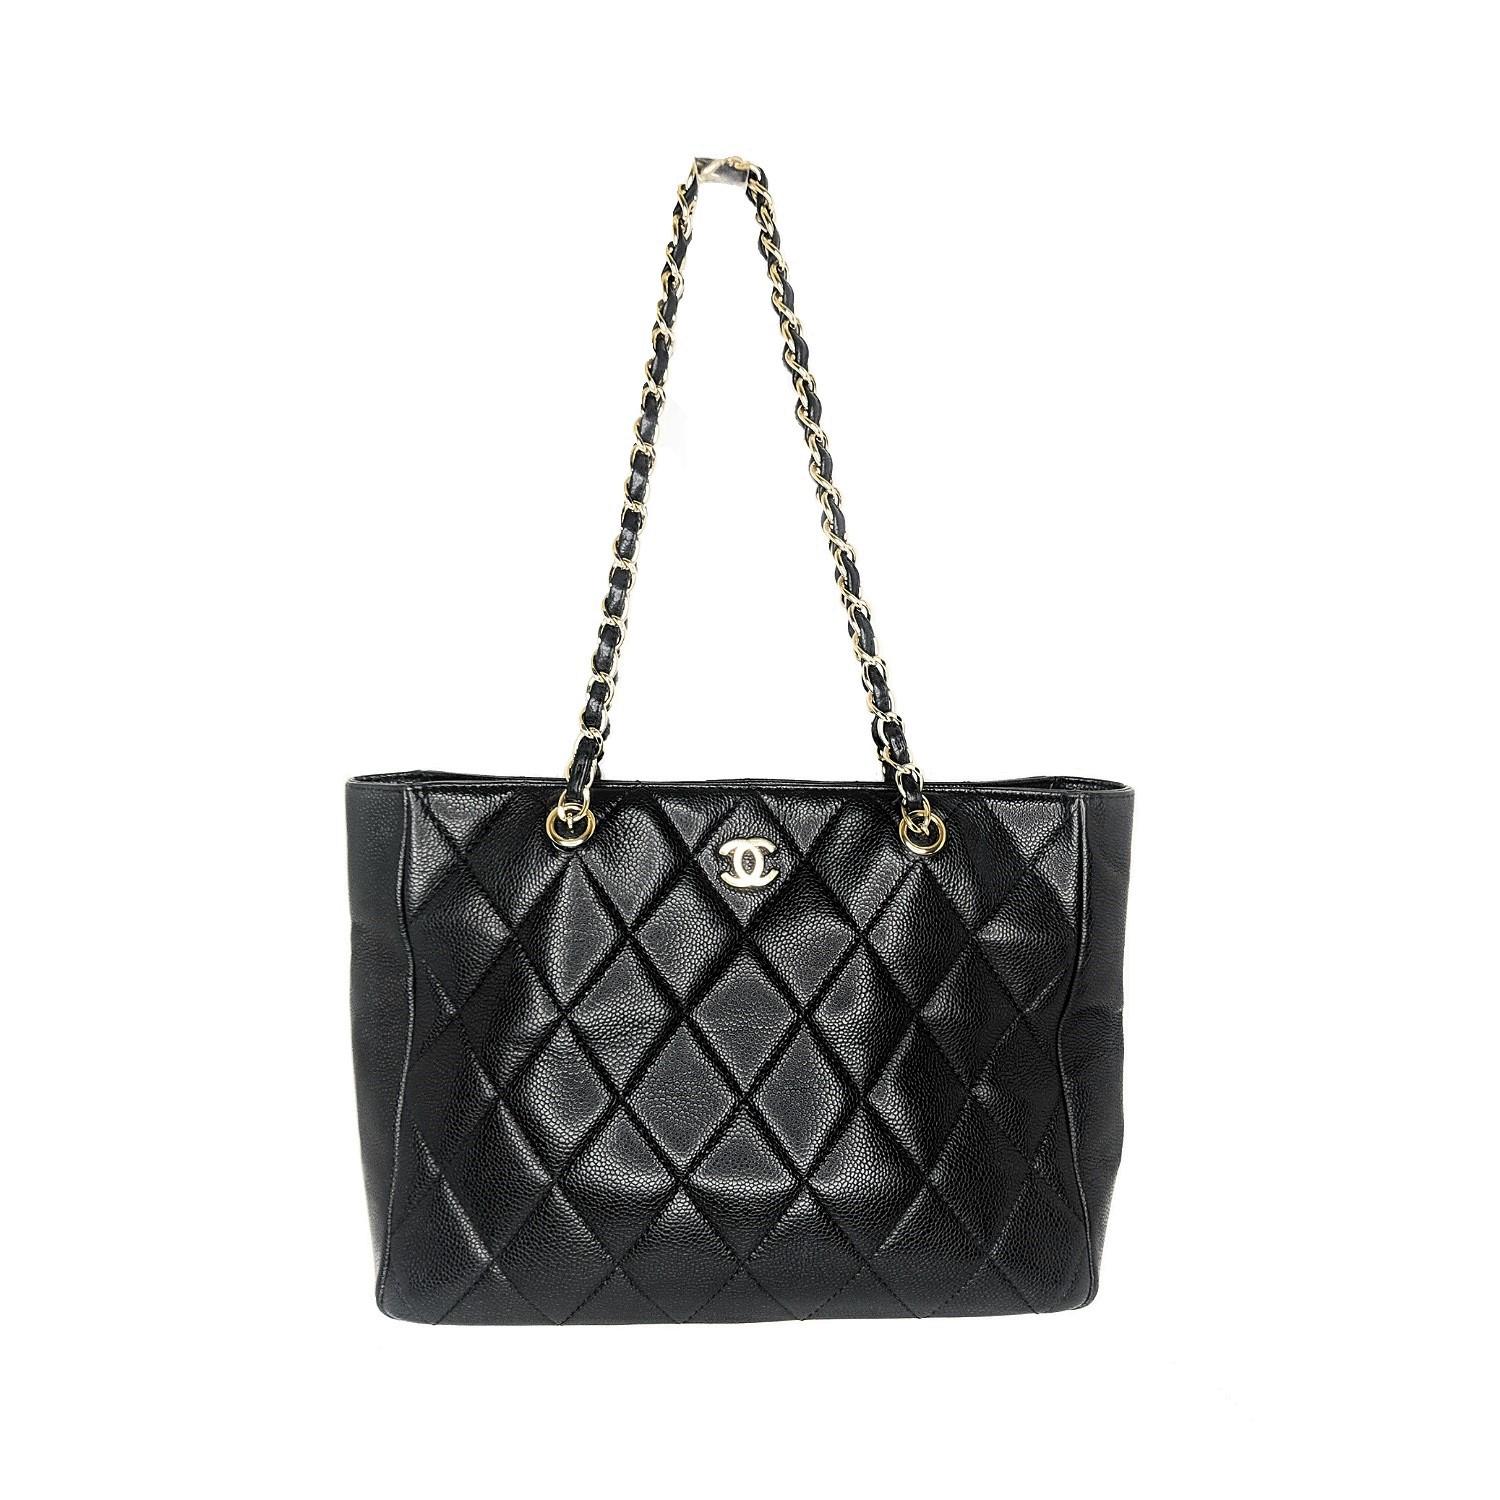 Vintage black quilted Caviar leather Chanel Timeless Classic tote with gold-tone hardware, dual leather woven chain-link shoulder straps, tonal leather lining, two pockets at interior wall; one with zip closure and CC logo emblem at front. Includes